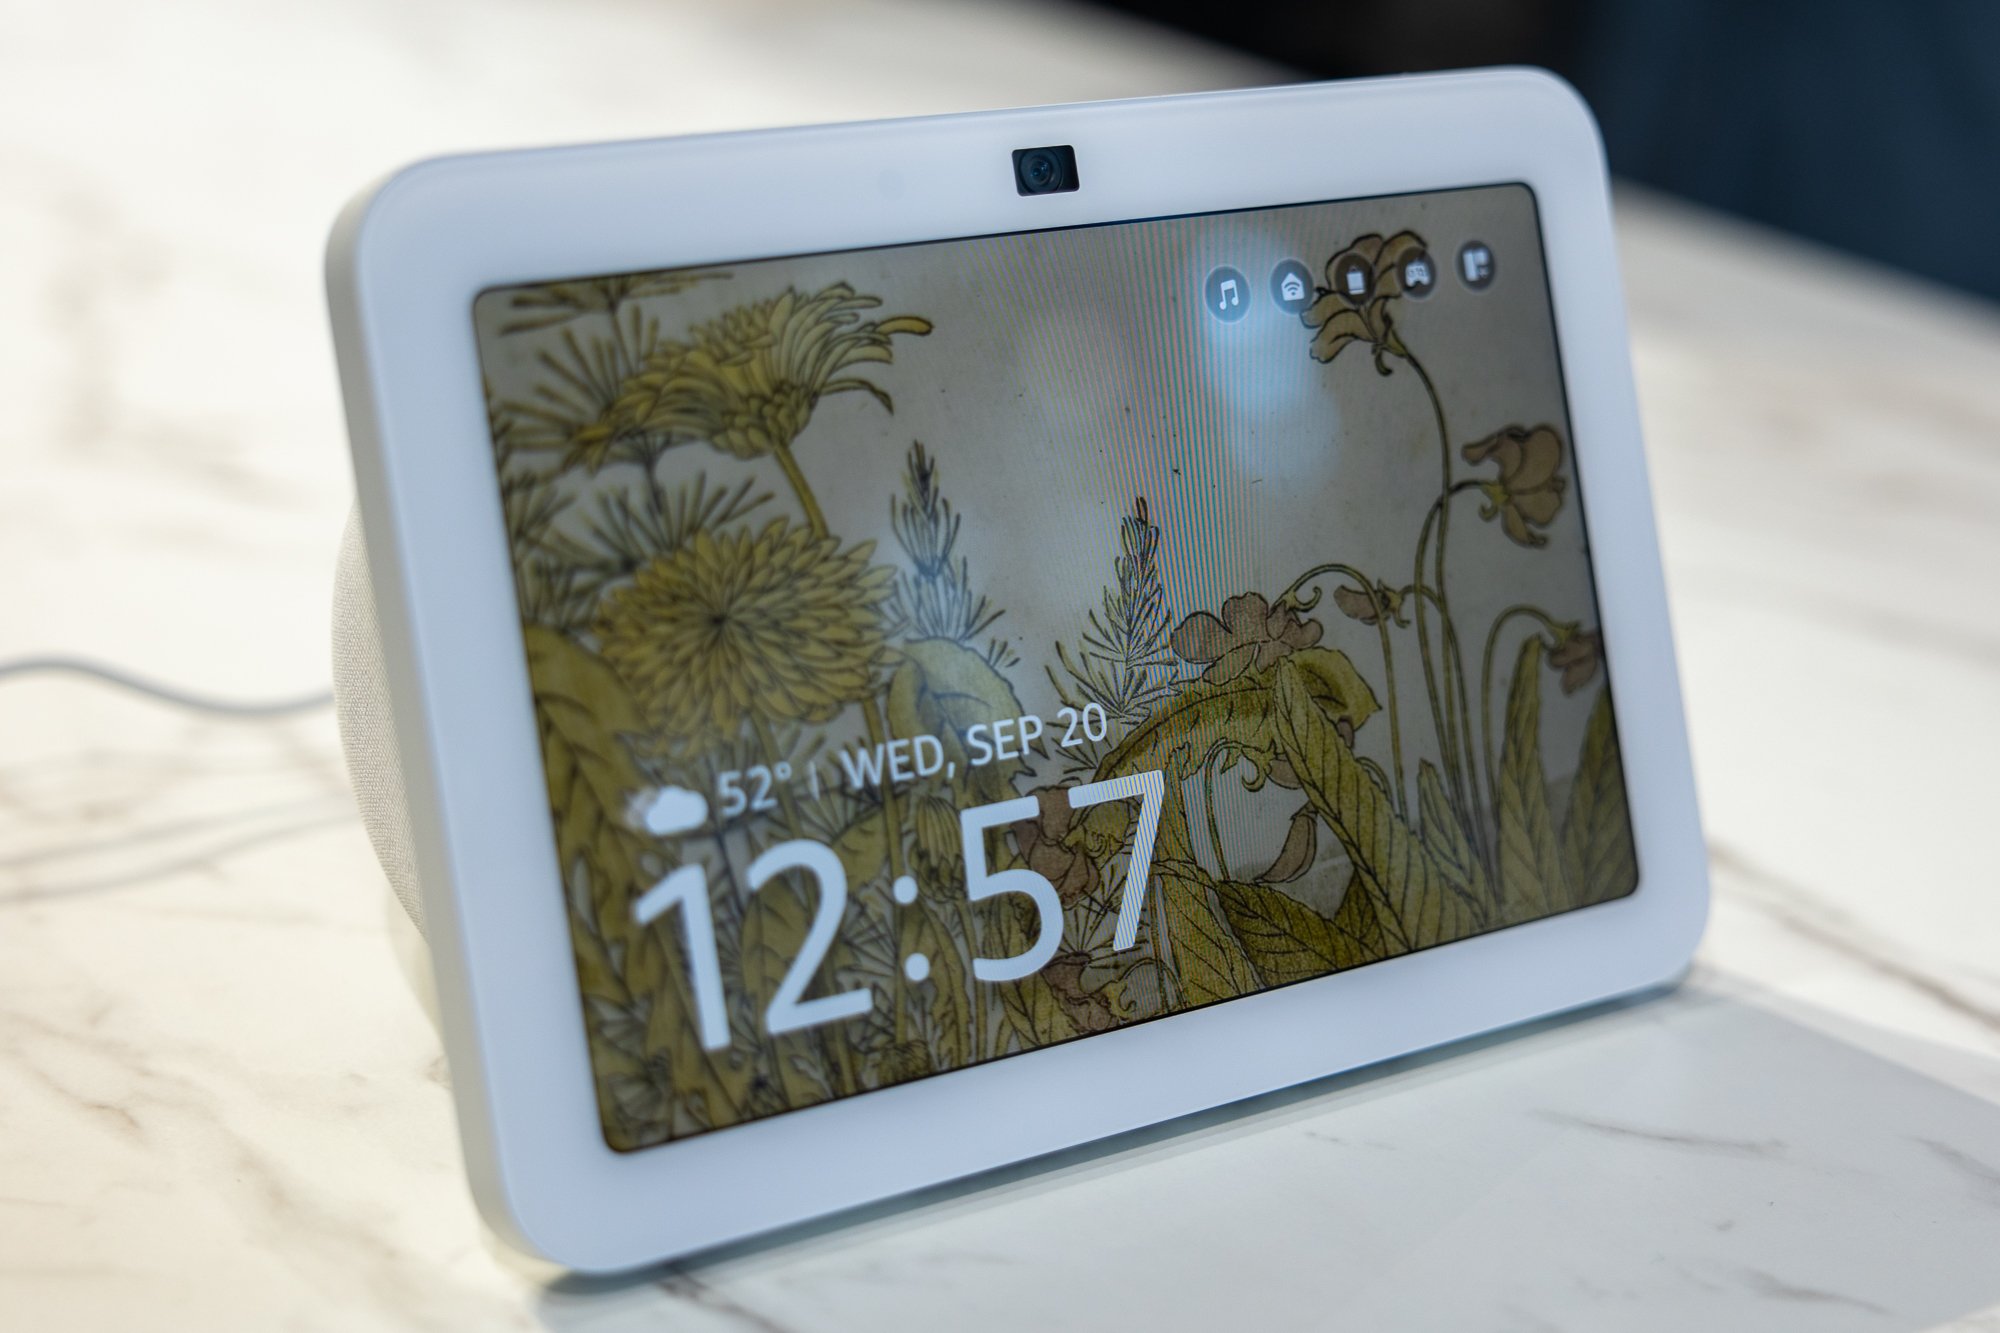 Echo Show 15 review: the biggest Alexa display, but is it the best?  - Reviews - Technology